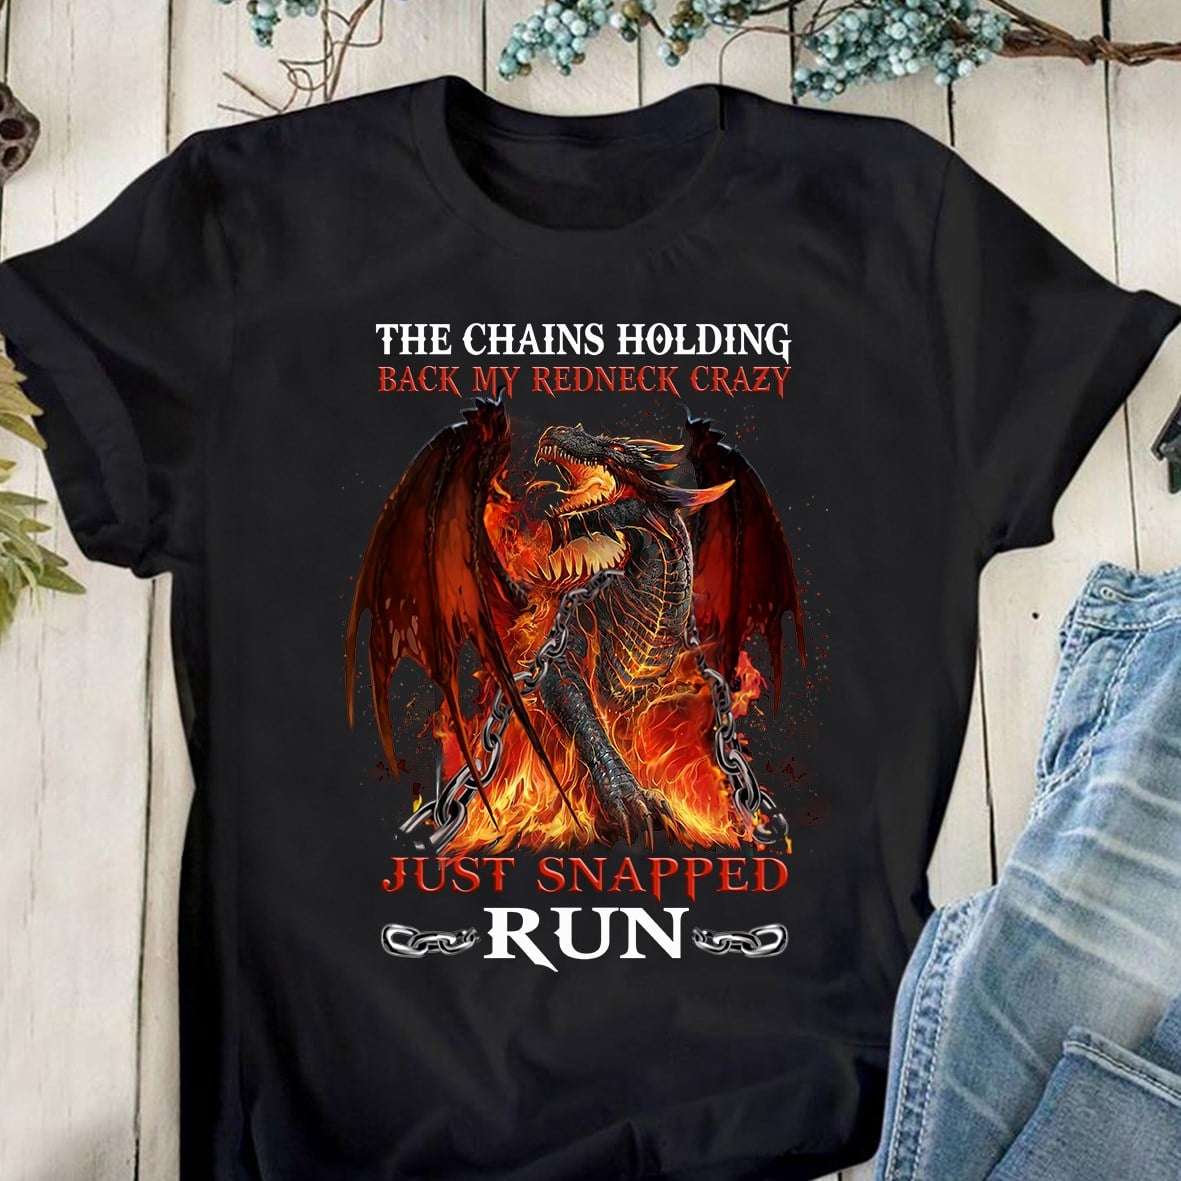 The chains holding back my redneck crazy just snapped - Flame dragon, crazy fire dragon